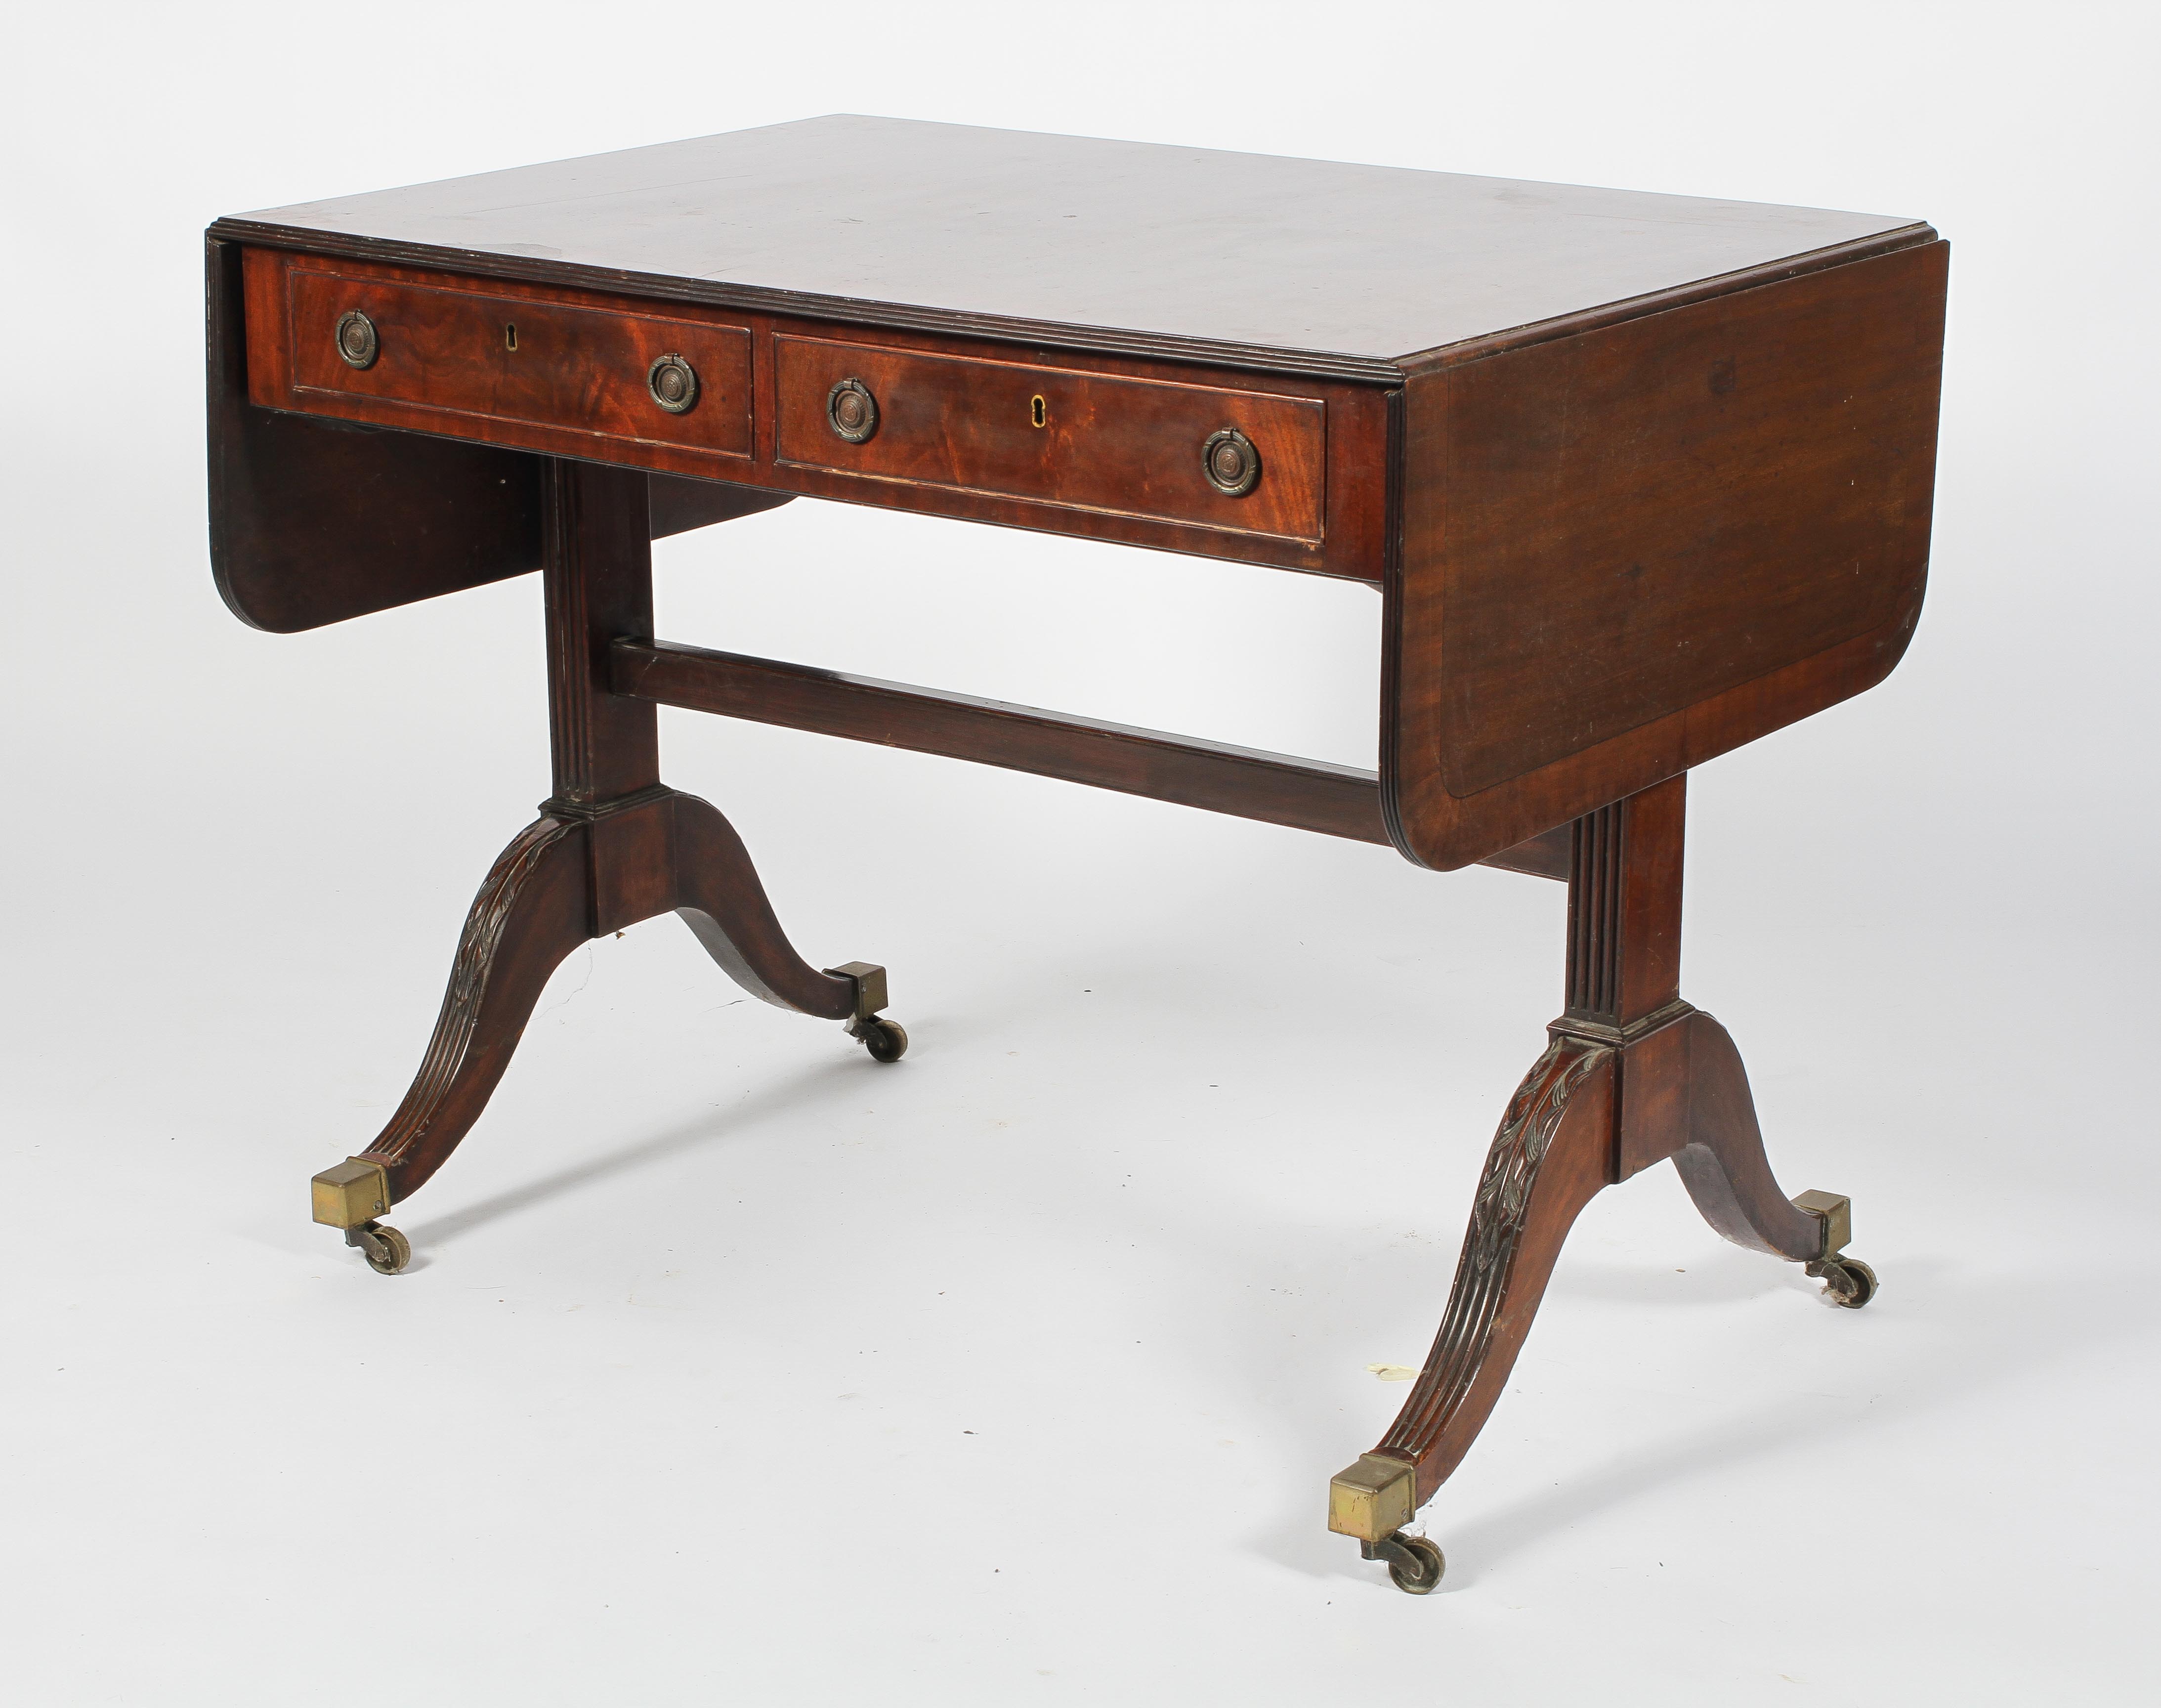 A Regency style mahogany and cross banded sofa table, drop leaves and two true drawers,